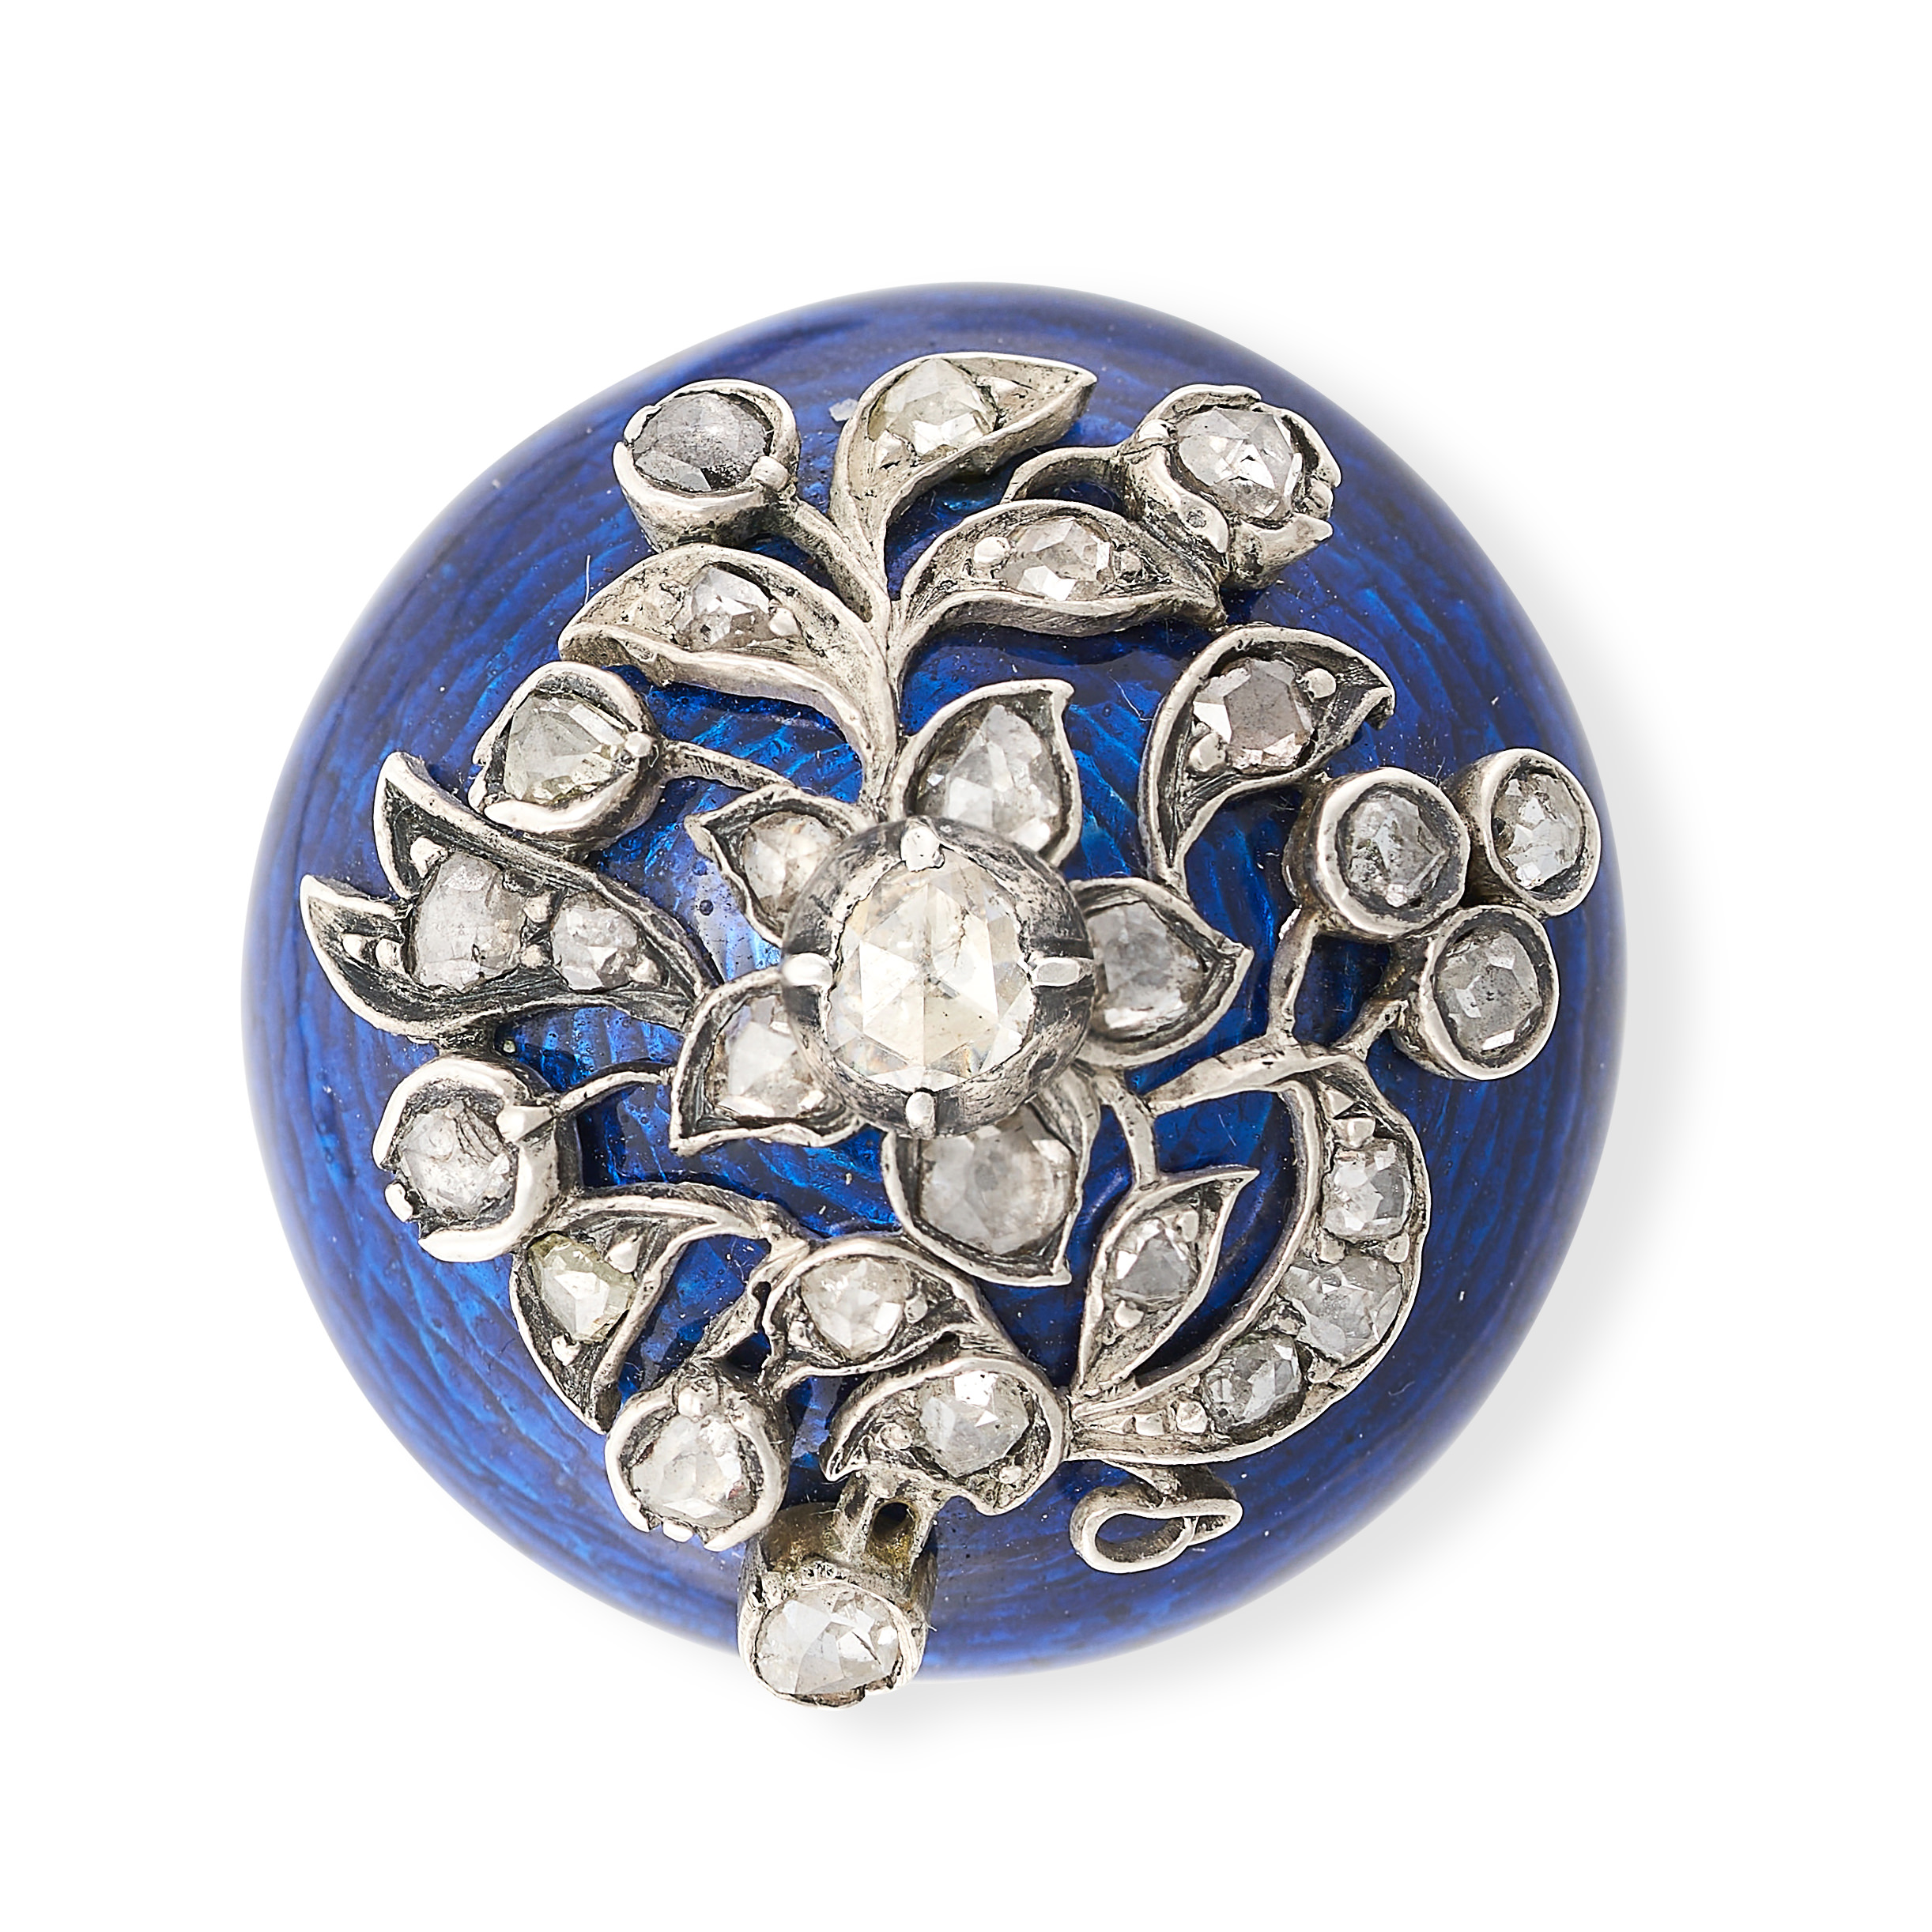 AN ANTIQUE ENAMEL AND DIAMOND BROOCH in yellow gold and silver, the circular domed body set with